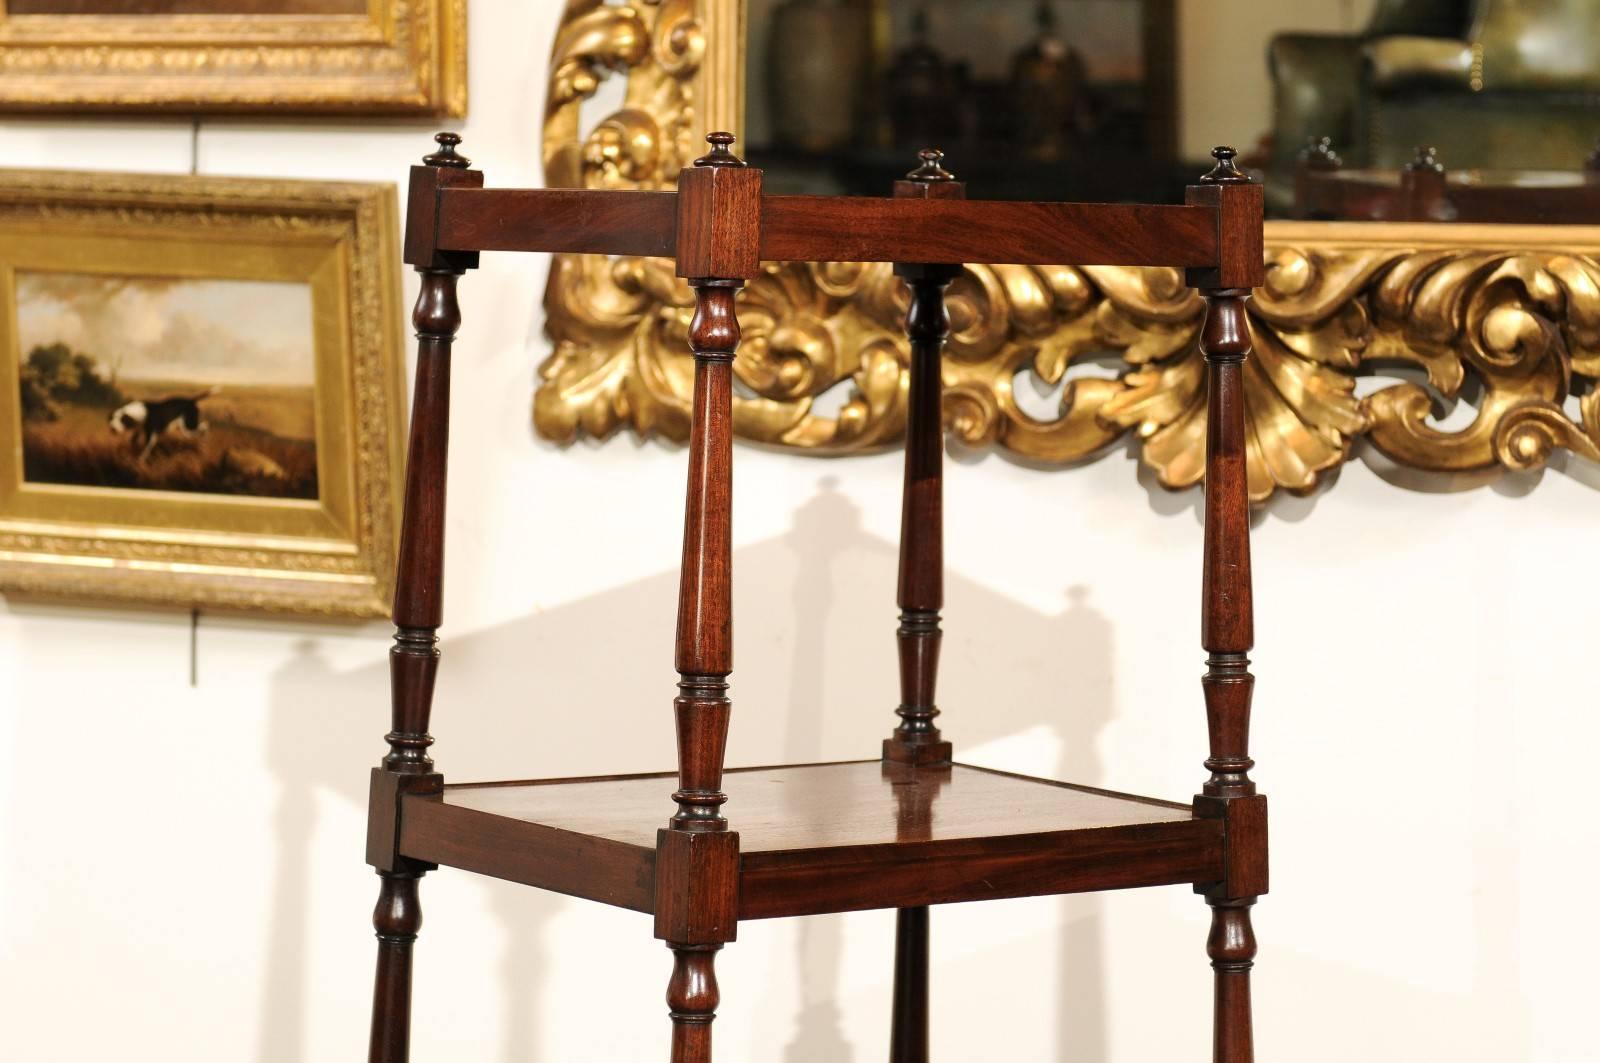 English Mahogany Trolley with Graduated Shelves from the Mid-19th Century For Sale 1